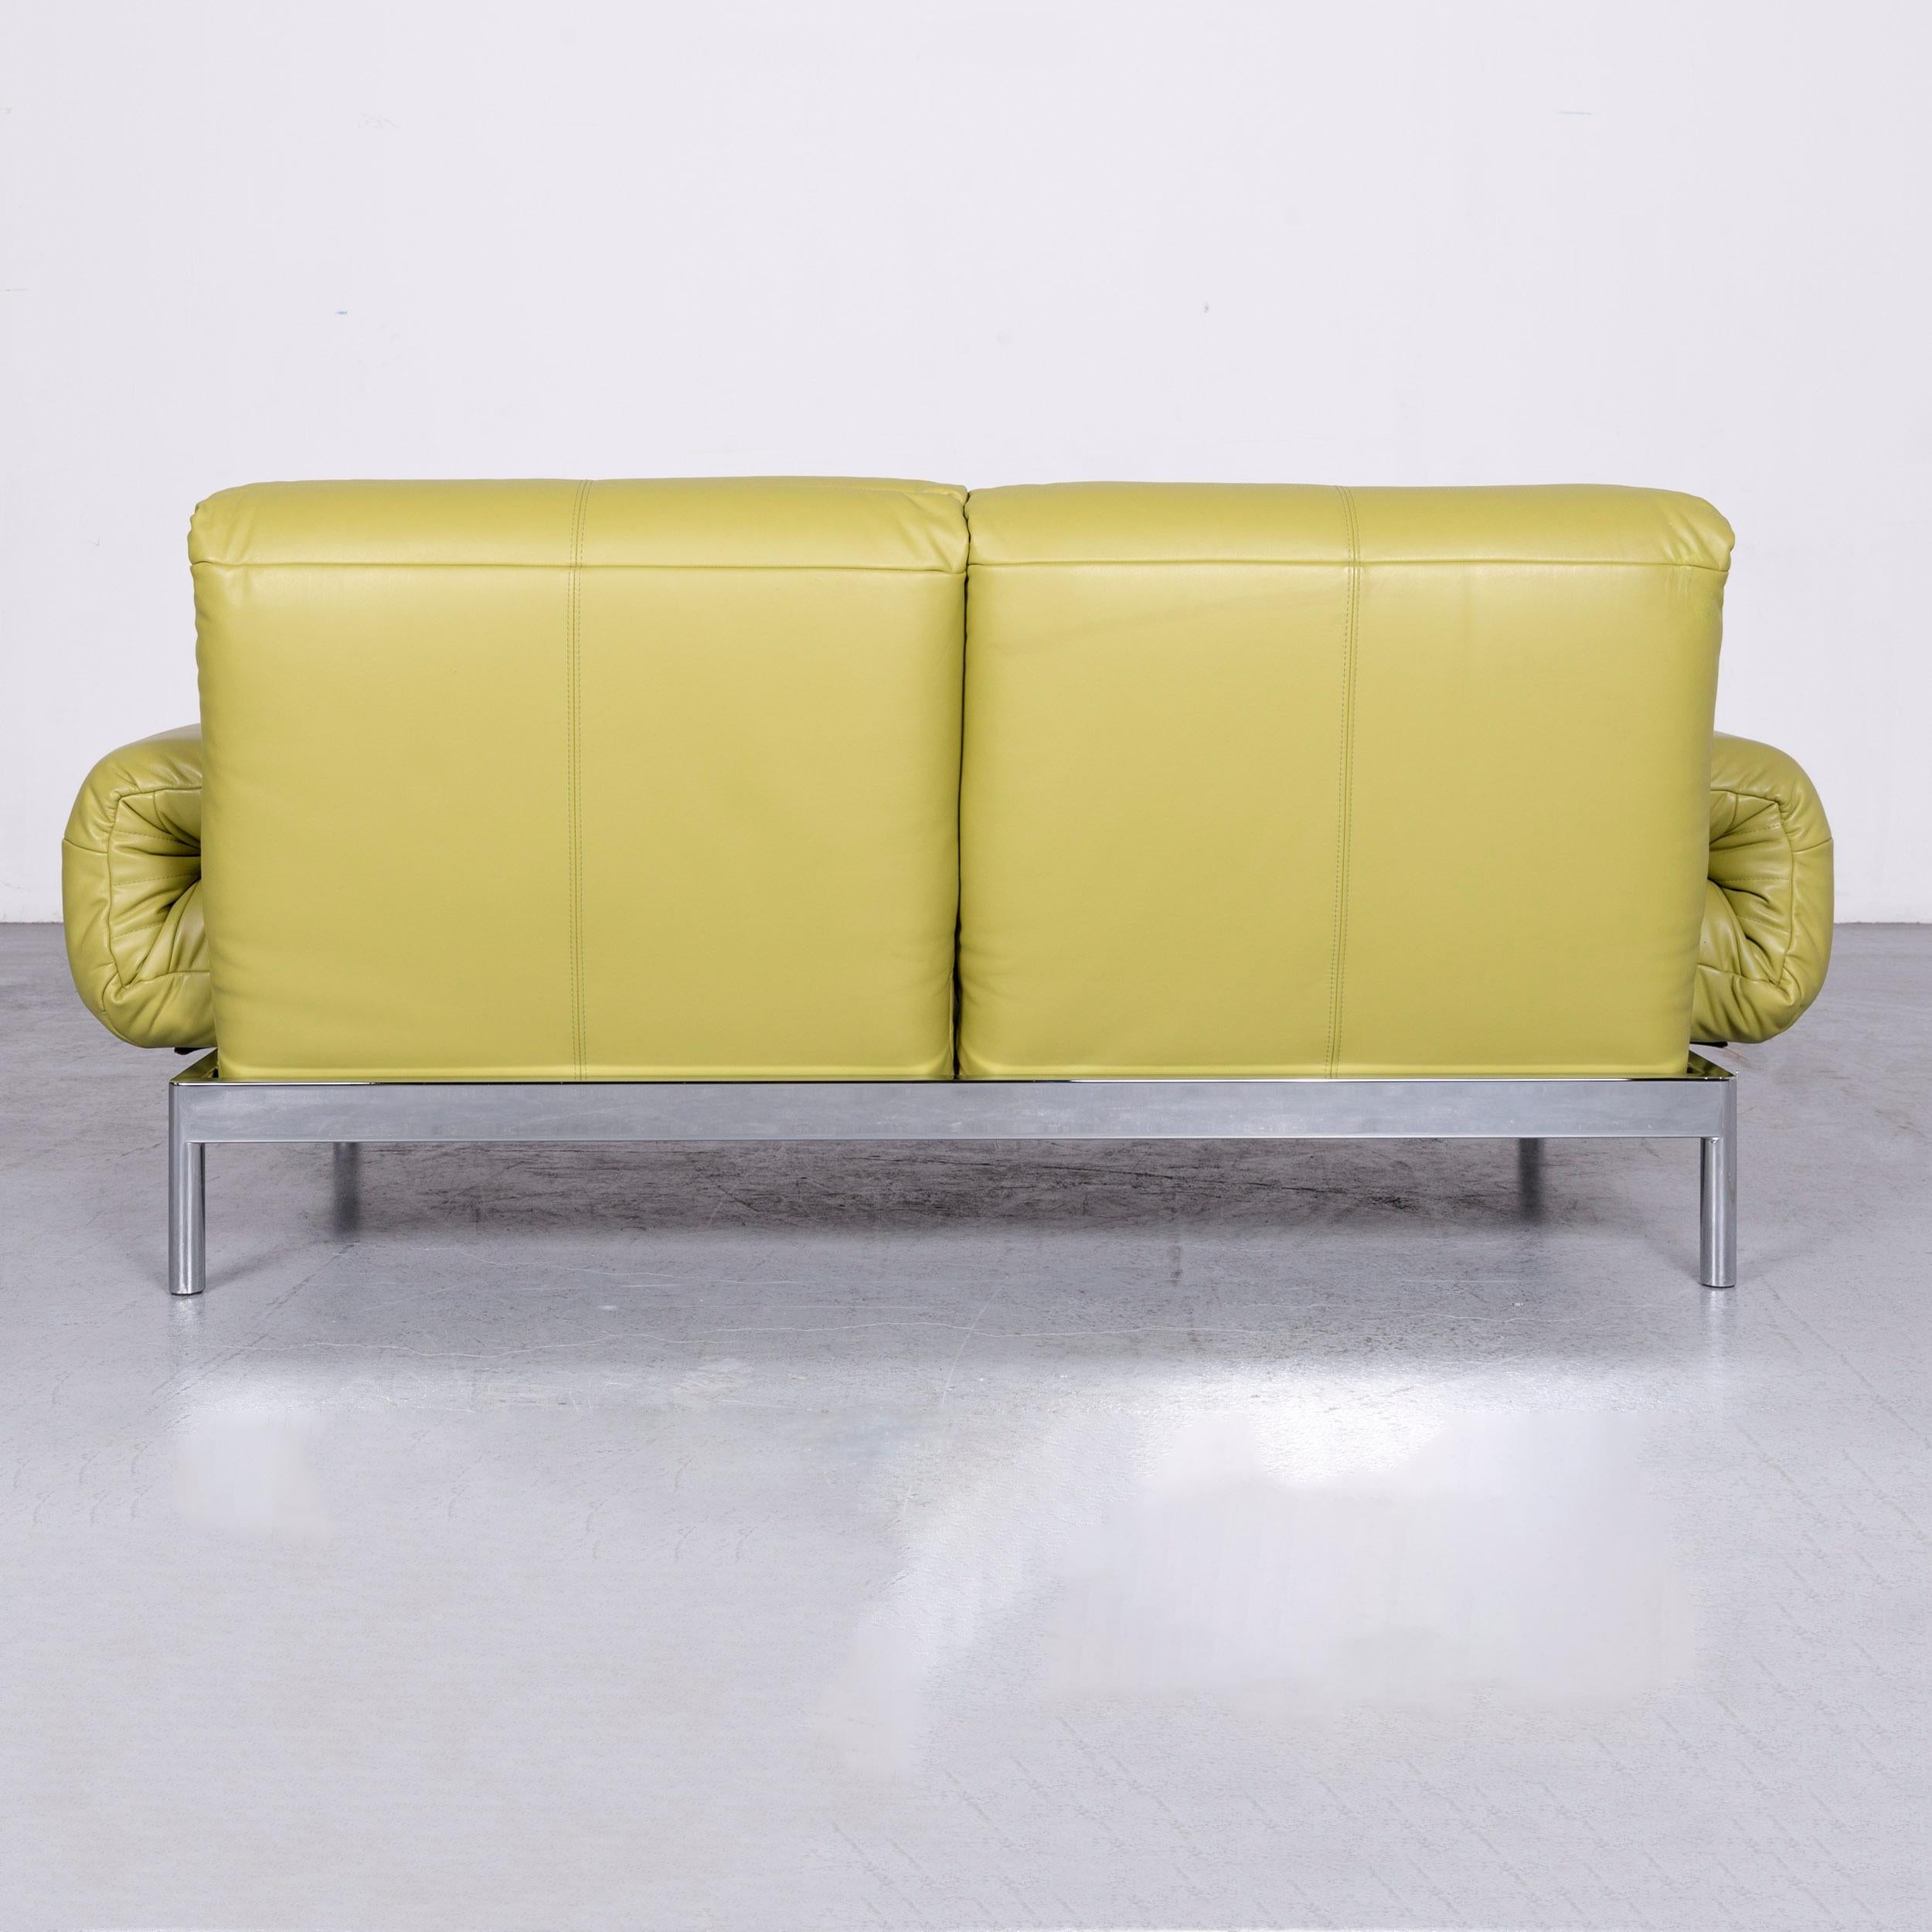 Rolf Benz Plura Designer Sofa Leather Green Relax Function Couch Modern 8